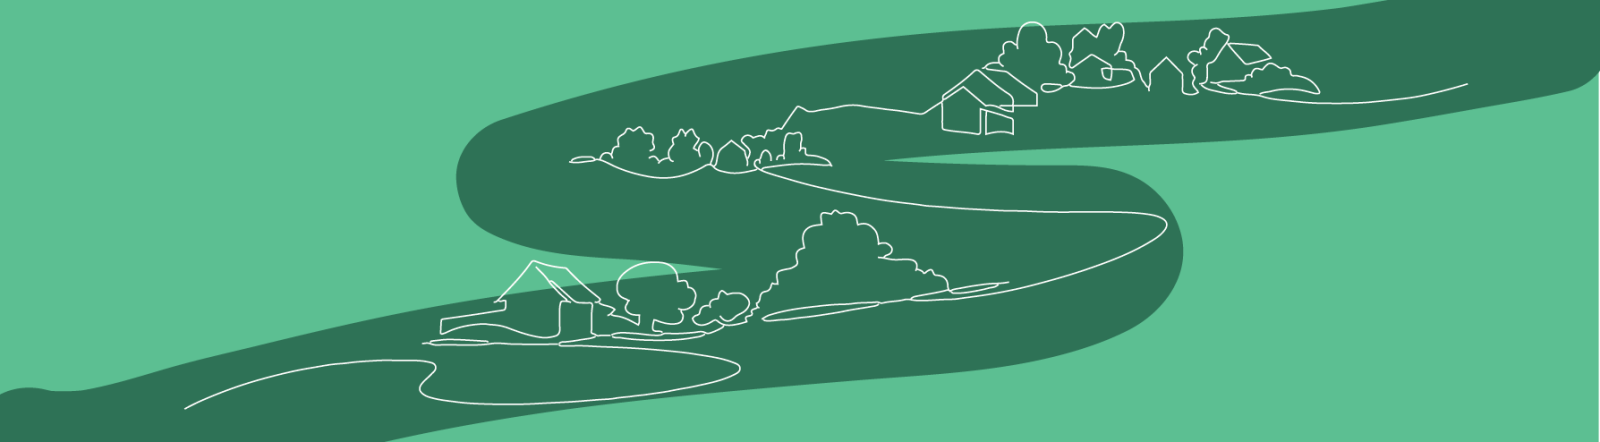 Countryside landscape graphic 